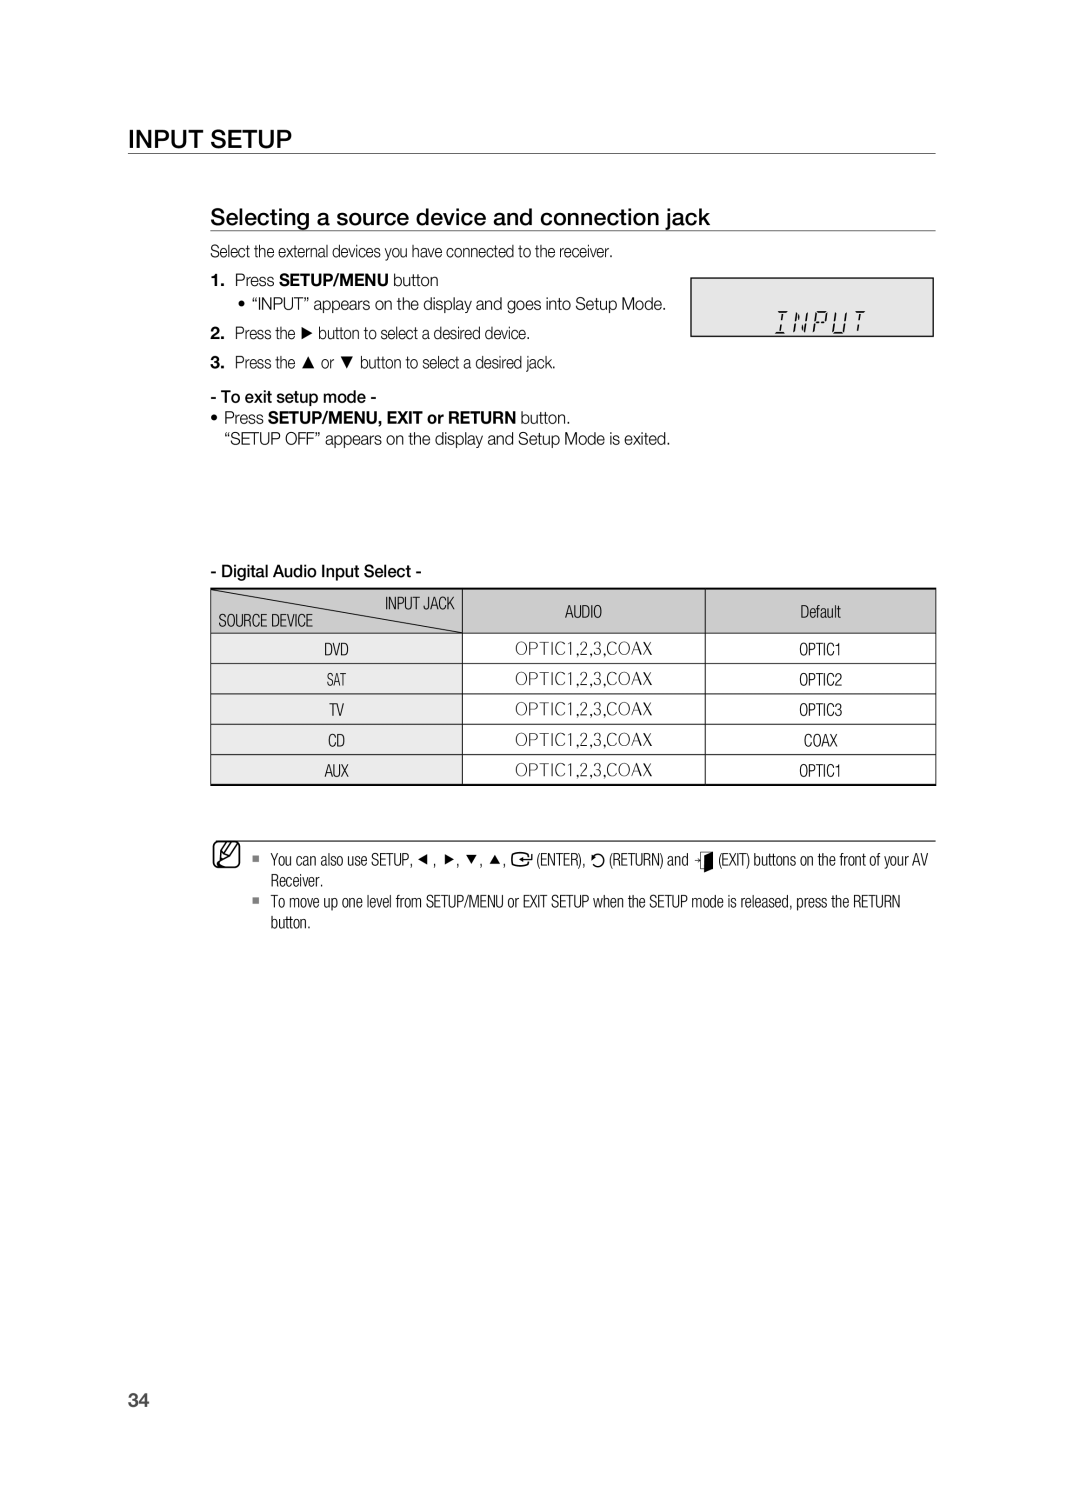 Samsung HT-AS730S user manual Input Setup, Selecting a source device and connection jack 